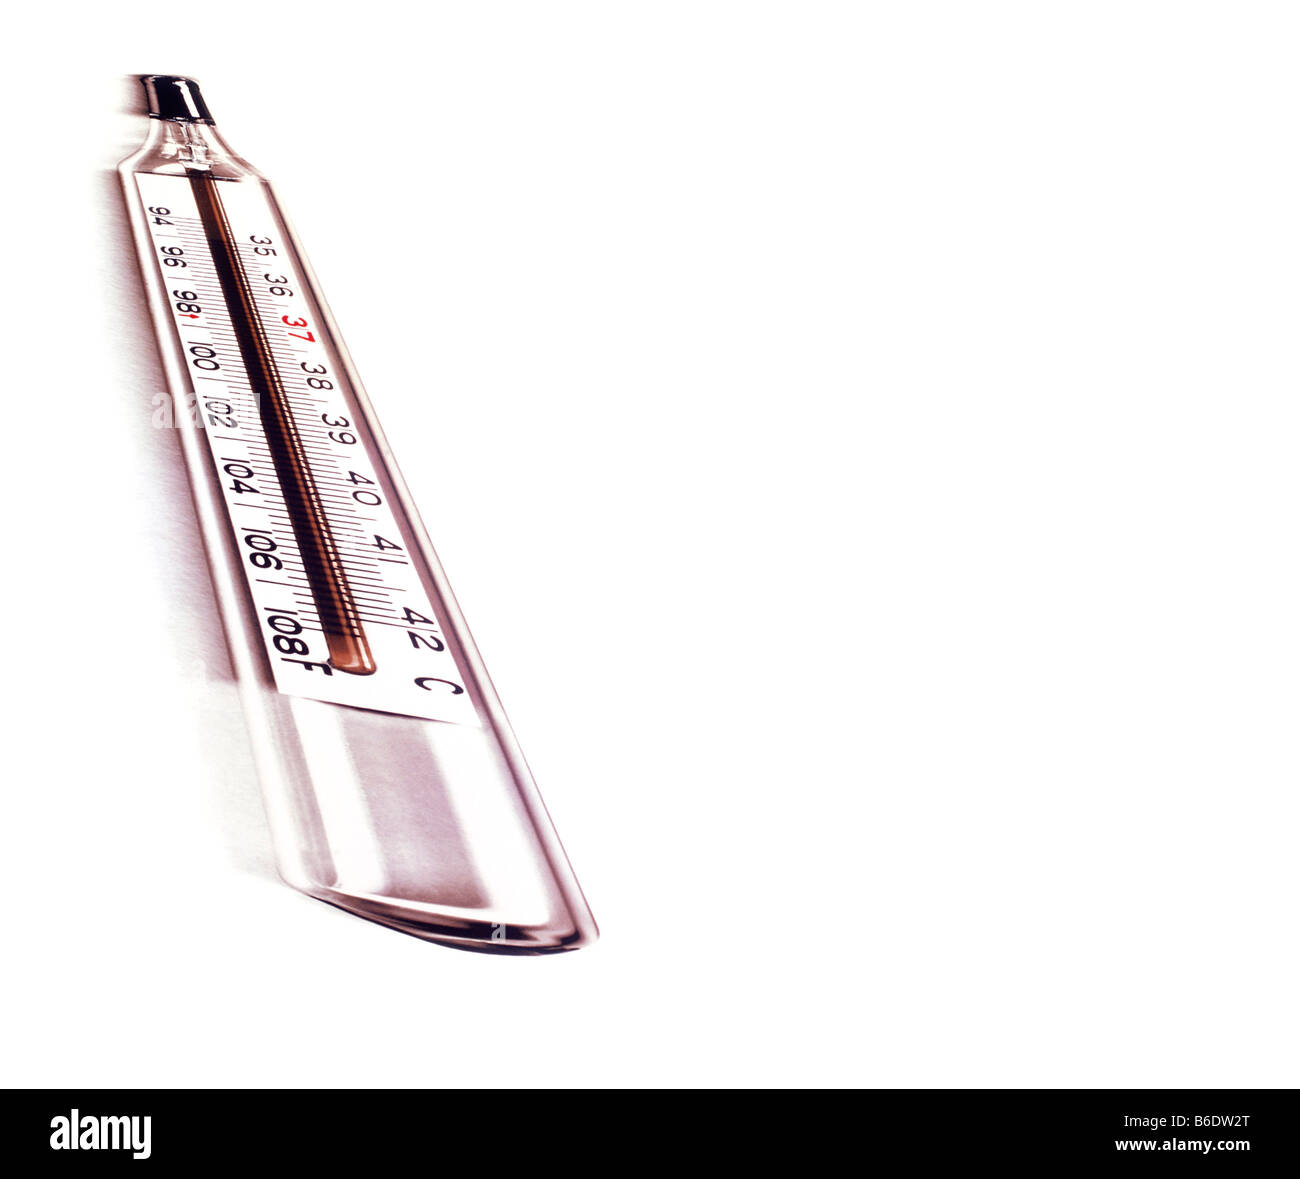 Thermometer. Clinical thermometer with a scalein both degrees Celsius and Fahrenheit. Stock Photo